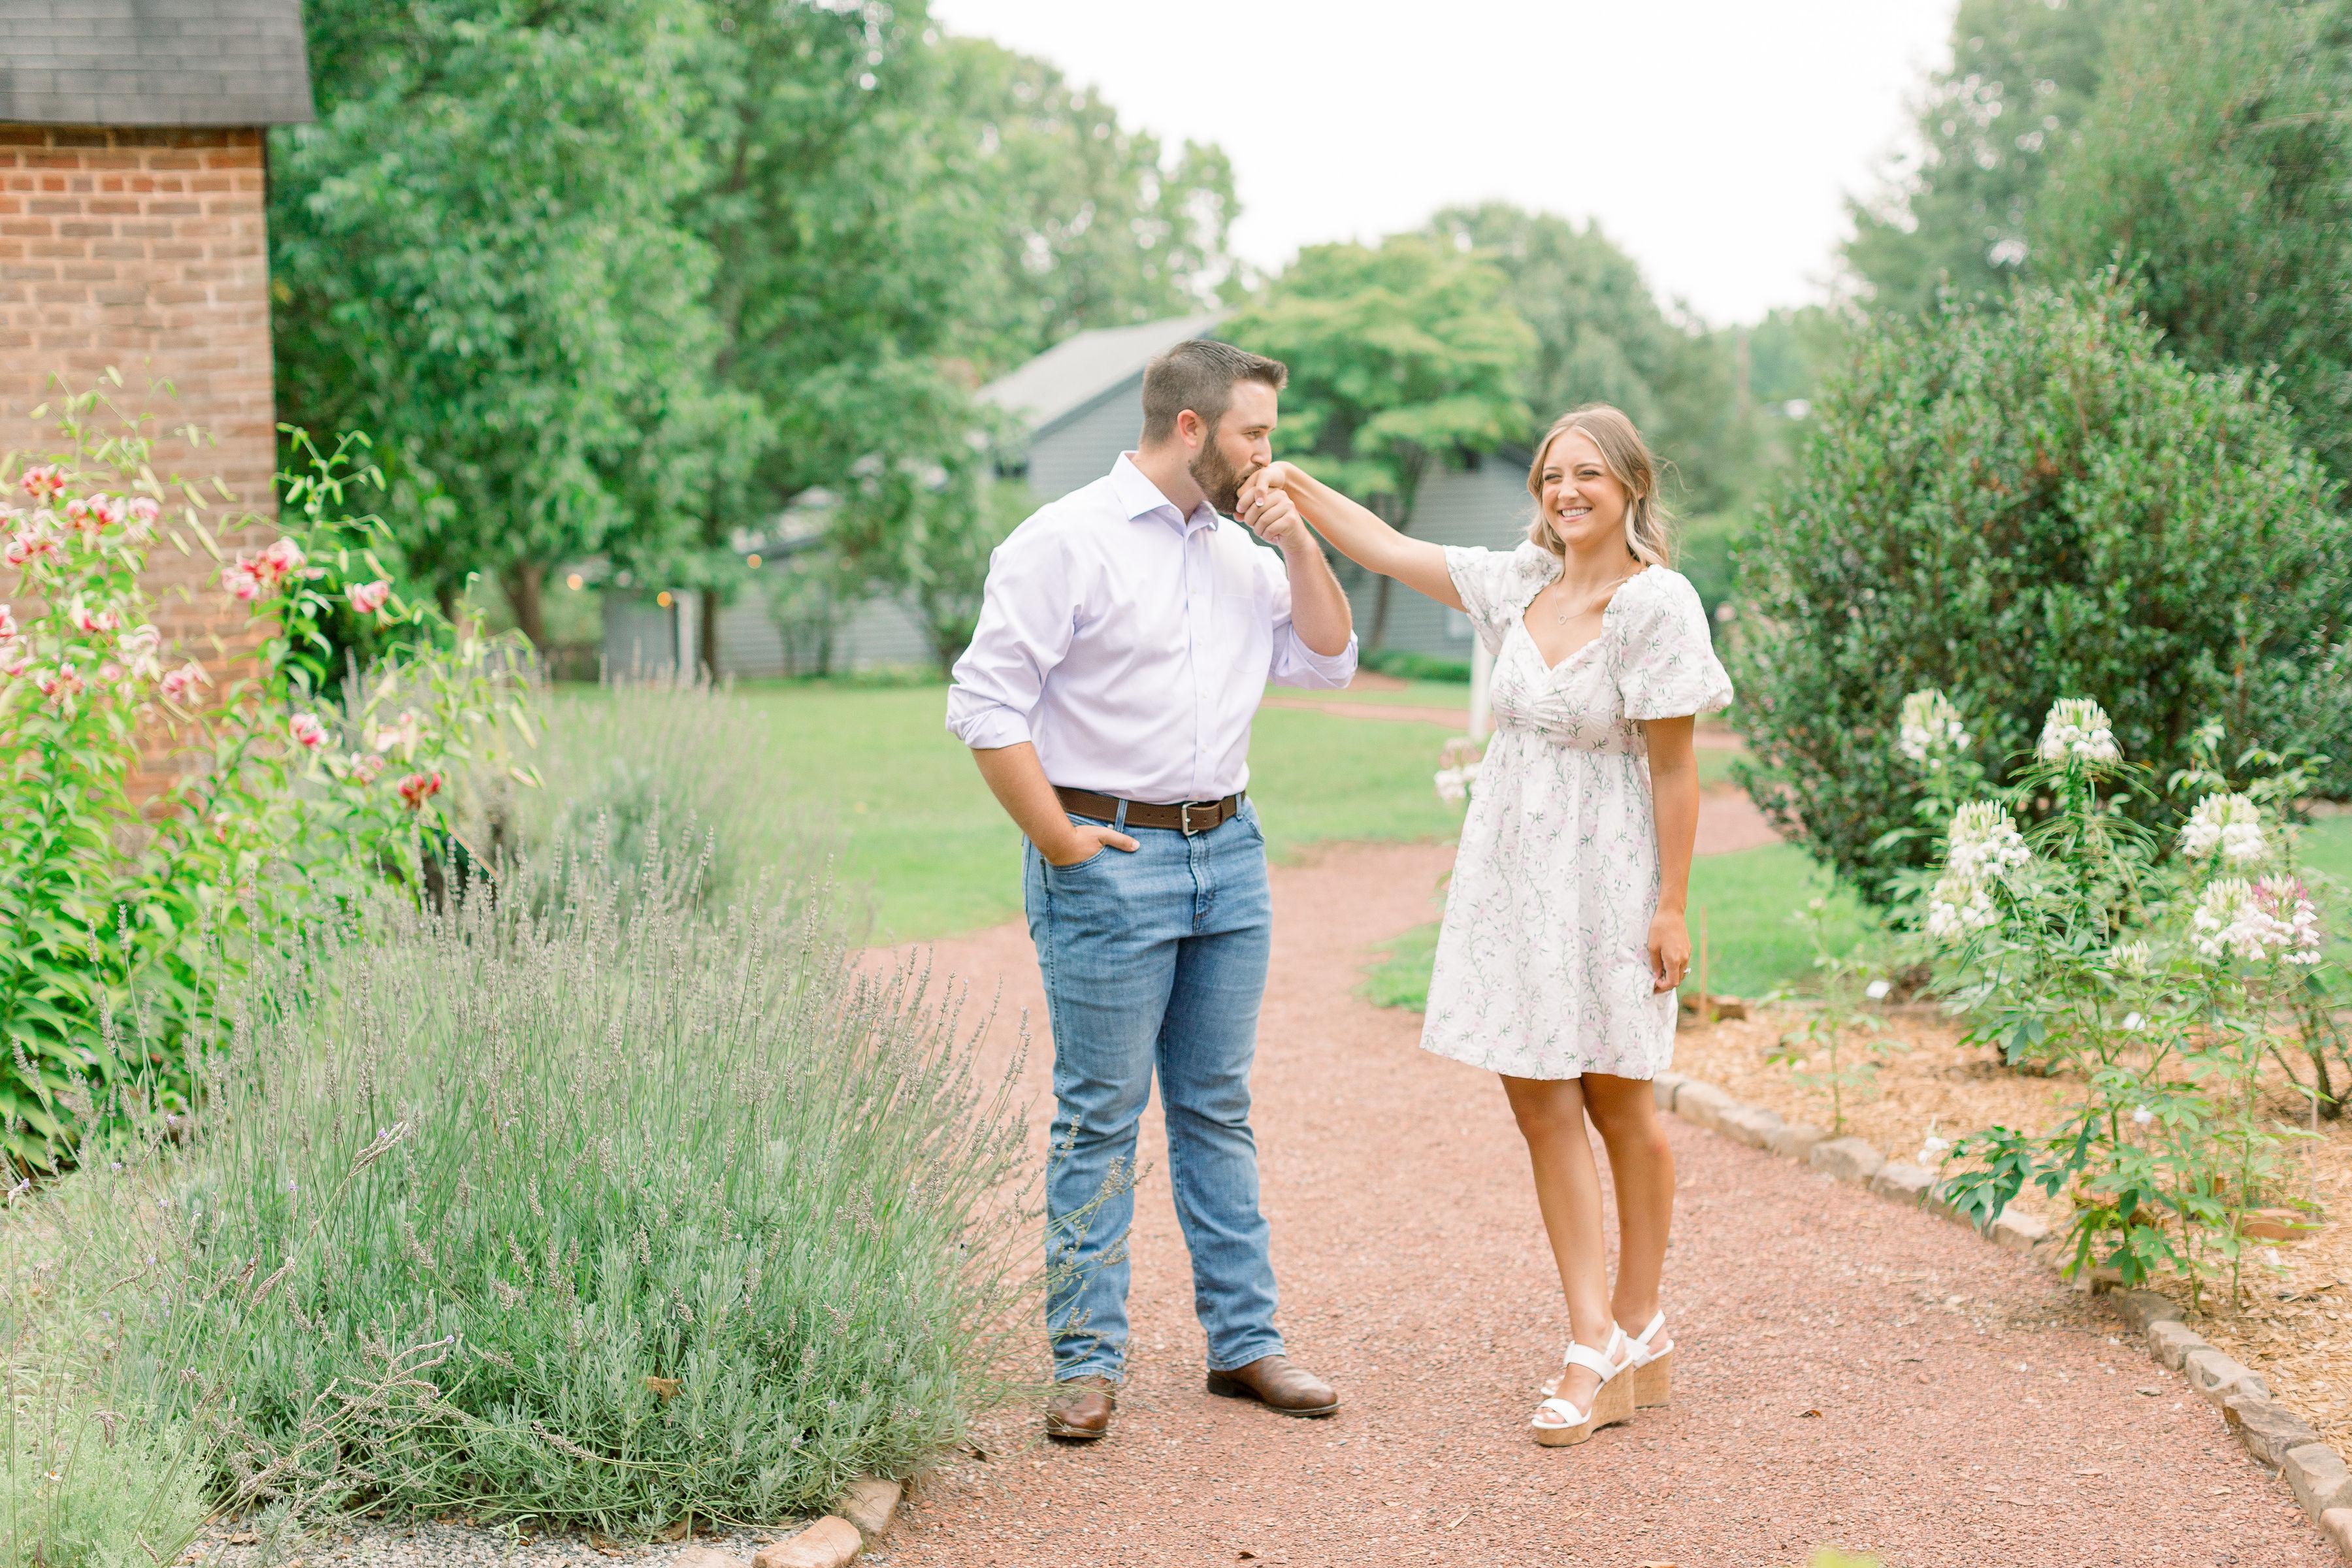 The Wedding Website of Madeline Ross and Forrest Wilson